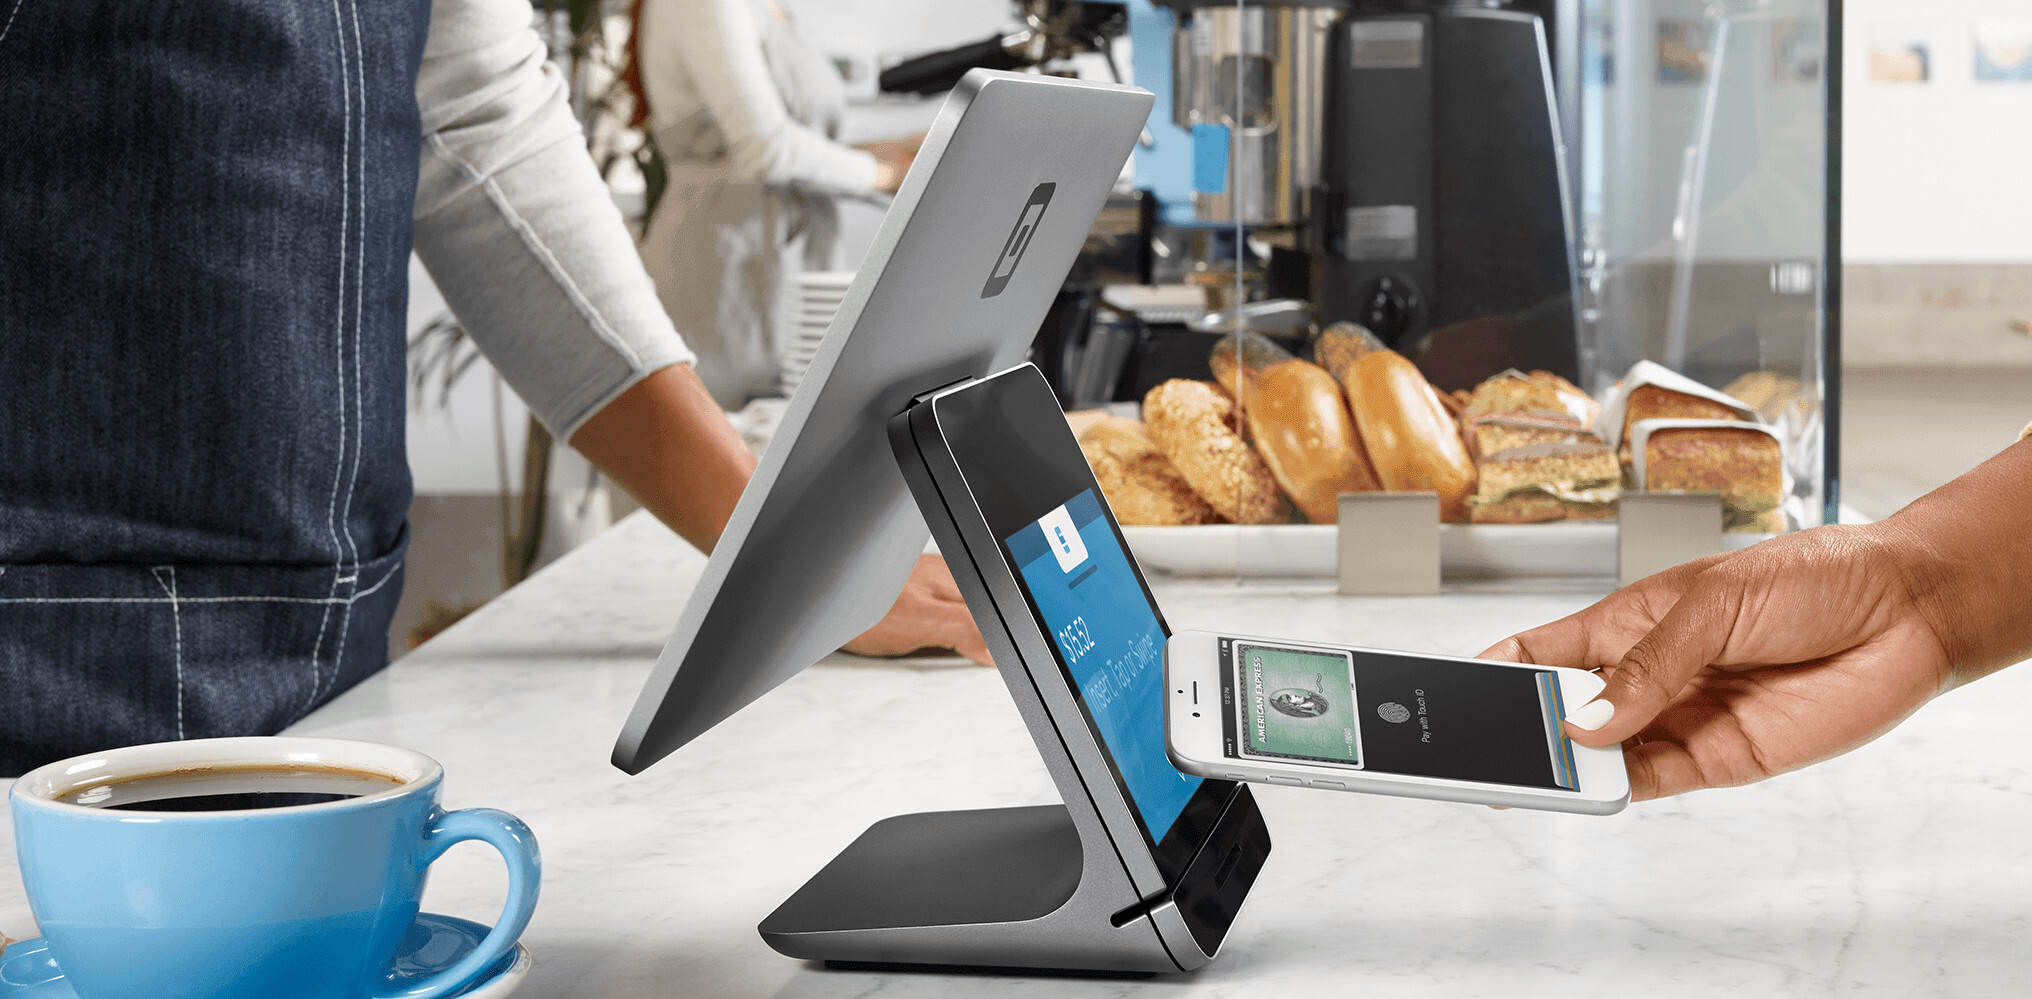 The Square Register is the iMac of credit card machines